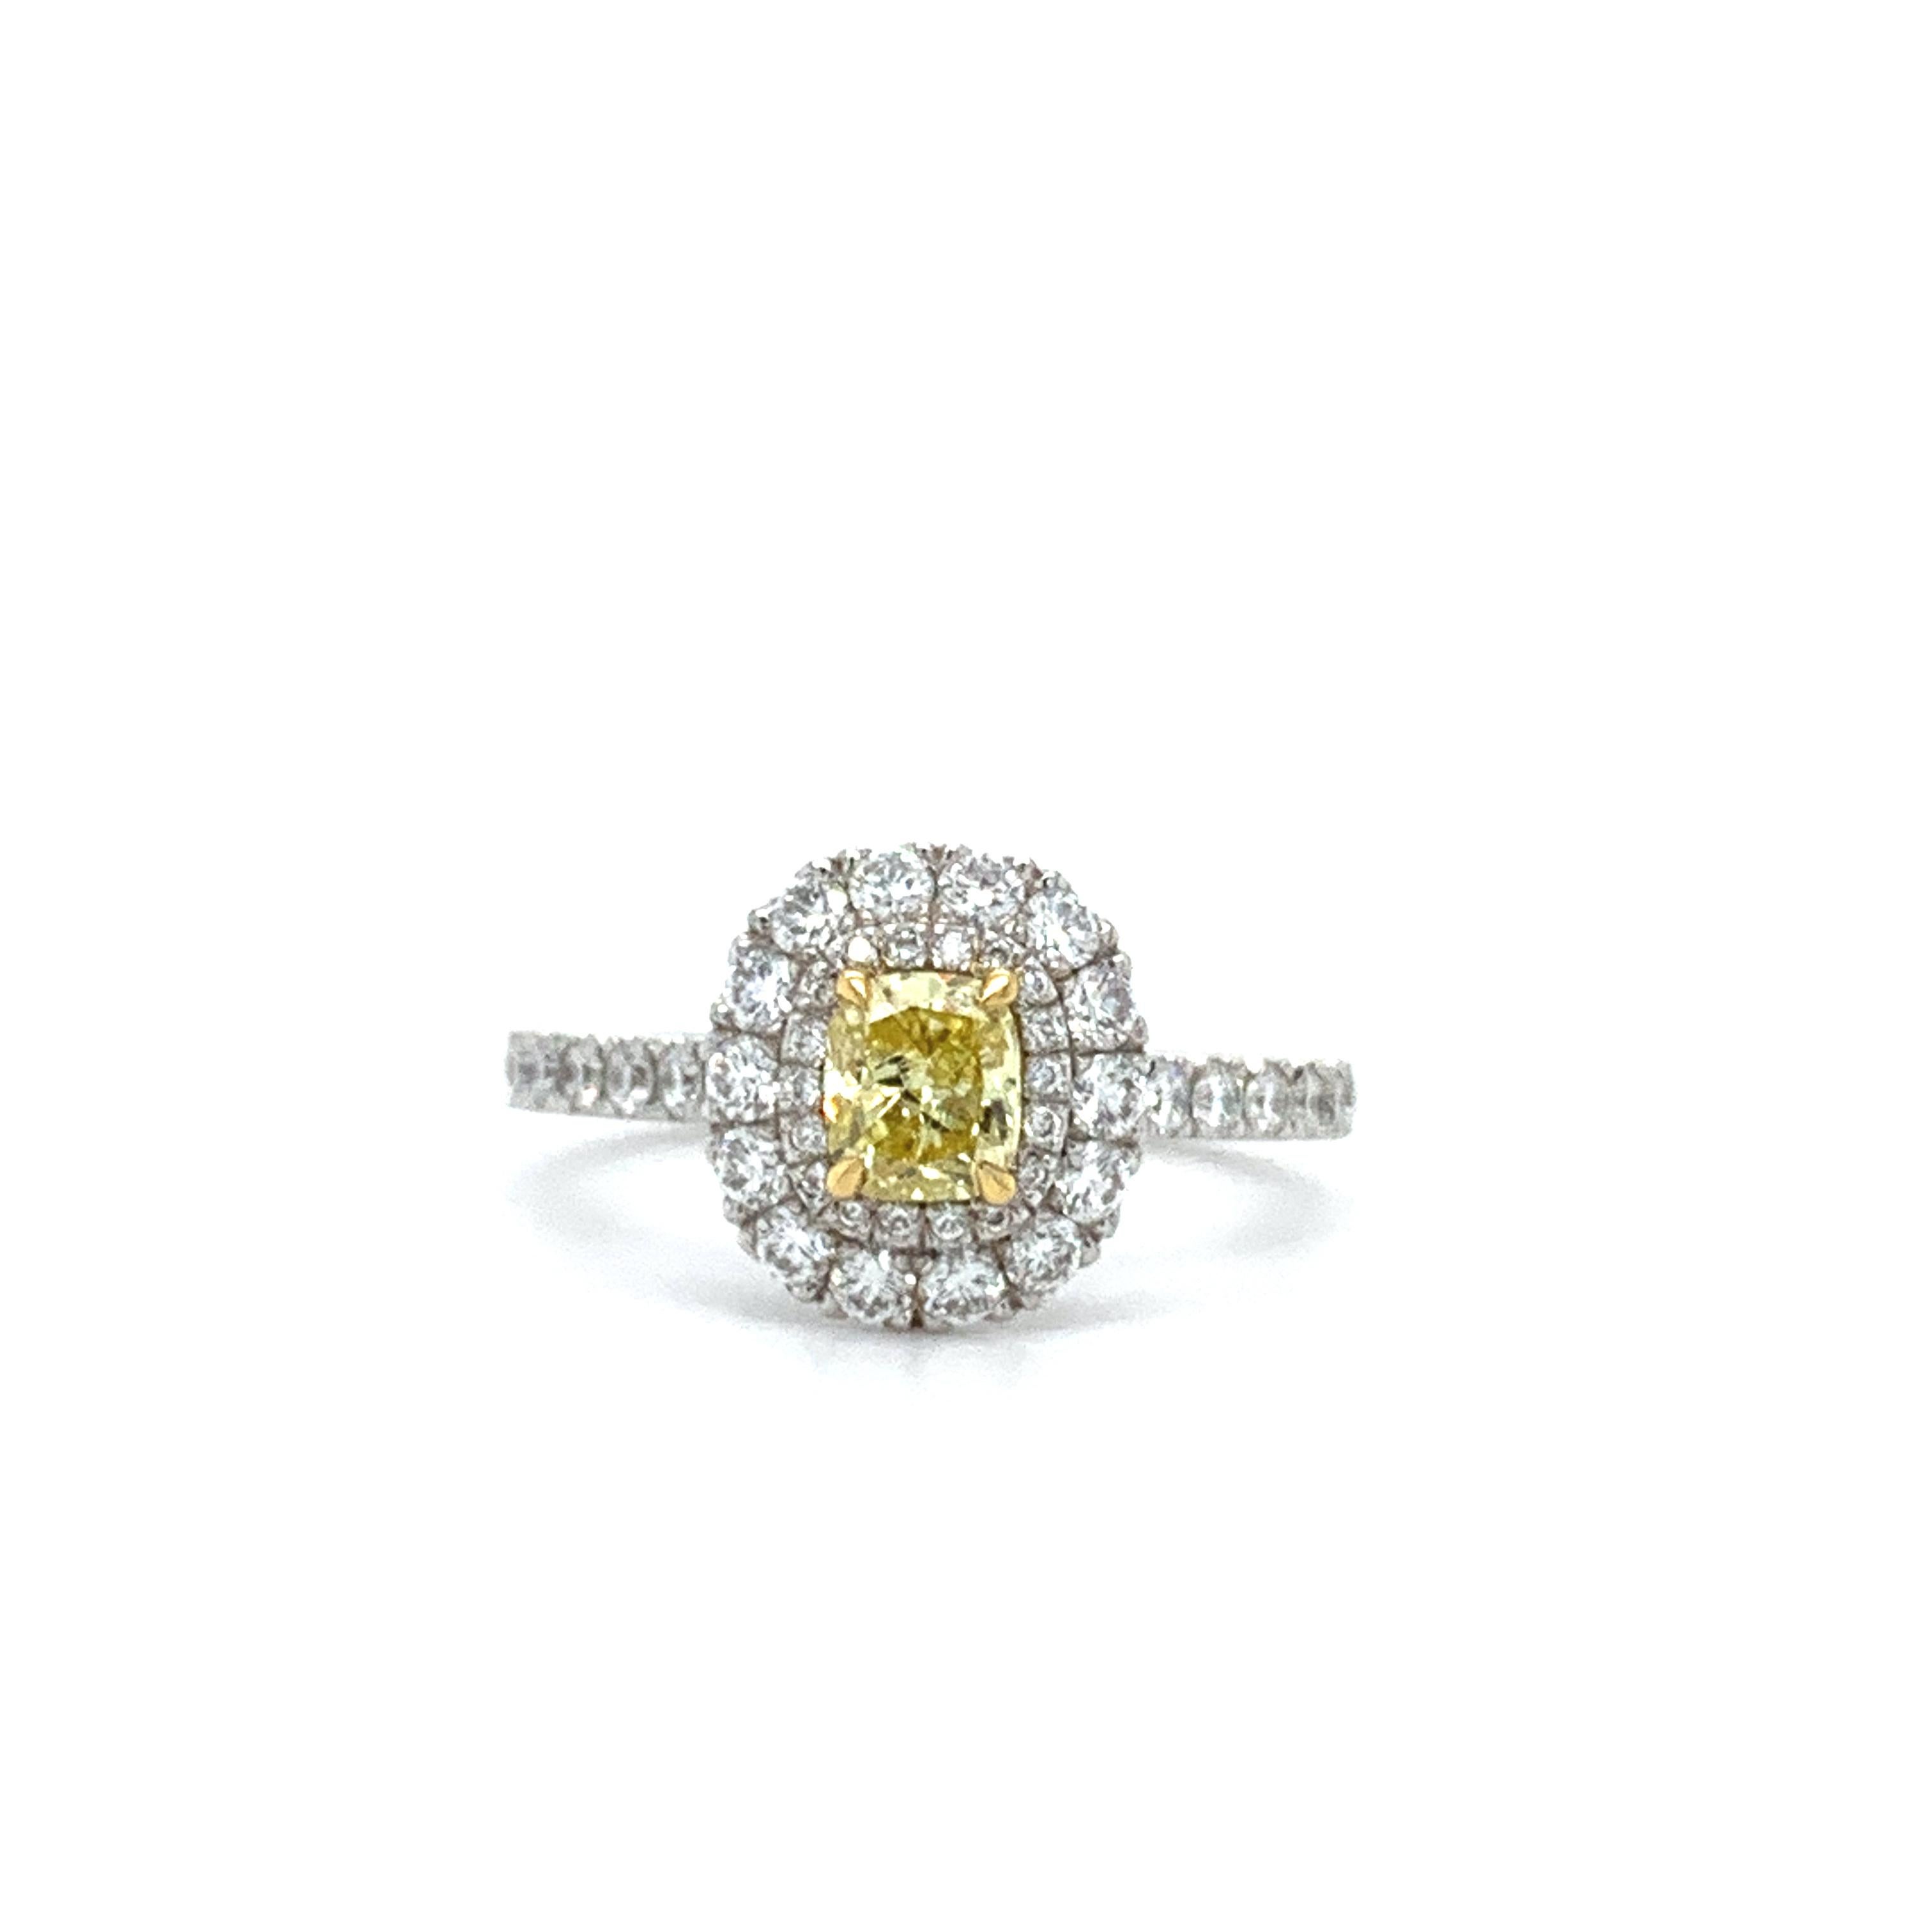 Fancy yellow diamond double halo engagement ring in platinum
Composed of of one solitaire fancy yellow diamond cushion cut total weighing 0.50ct accented by round brilliant diamond total weighing 0.75ct F colour VS1 clarity double halo engagement